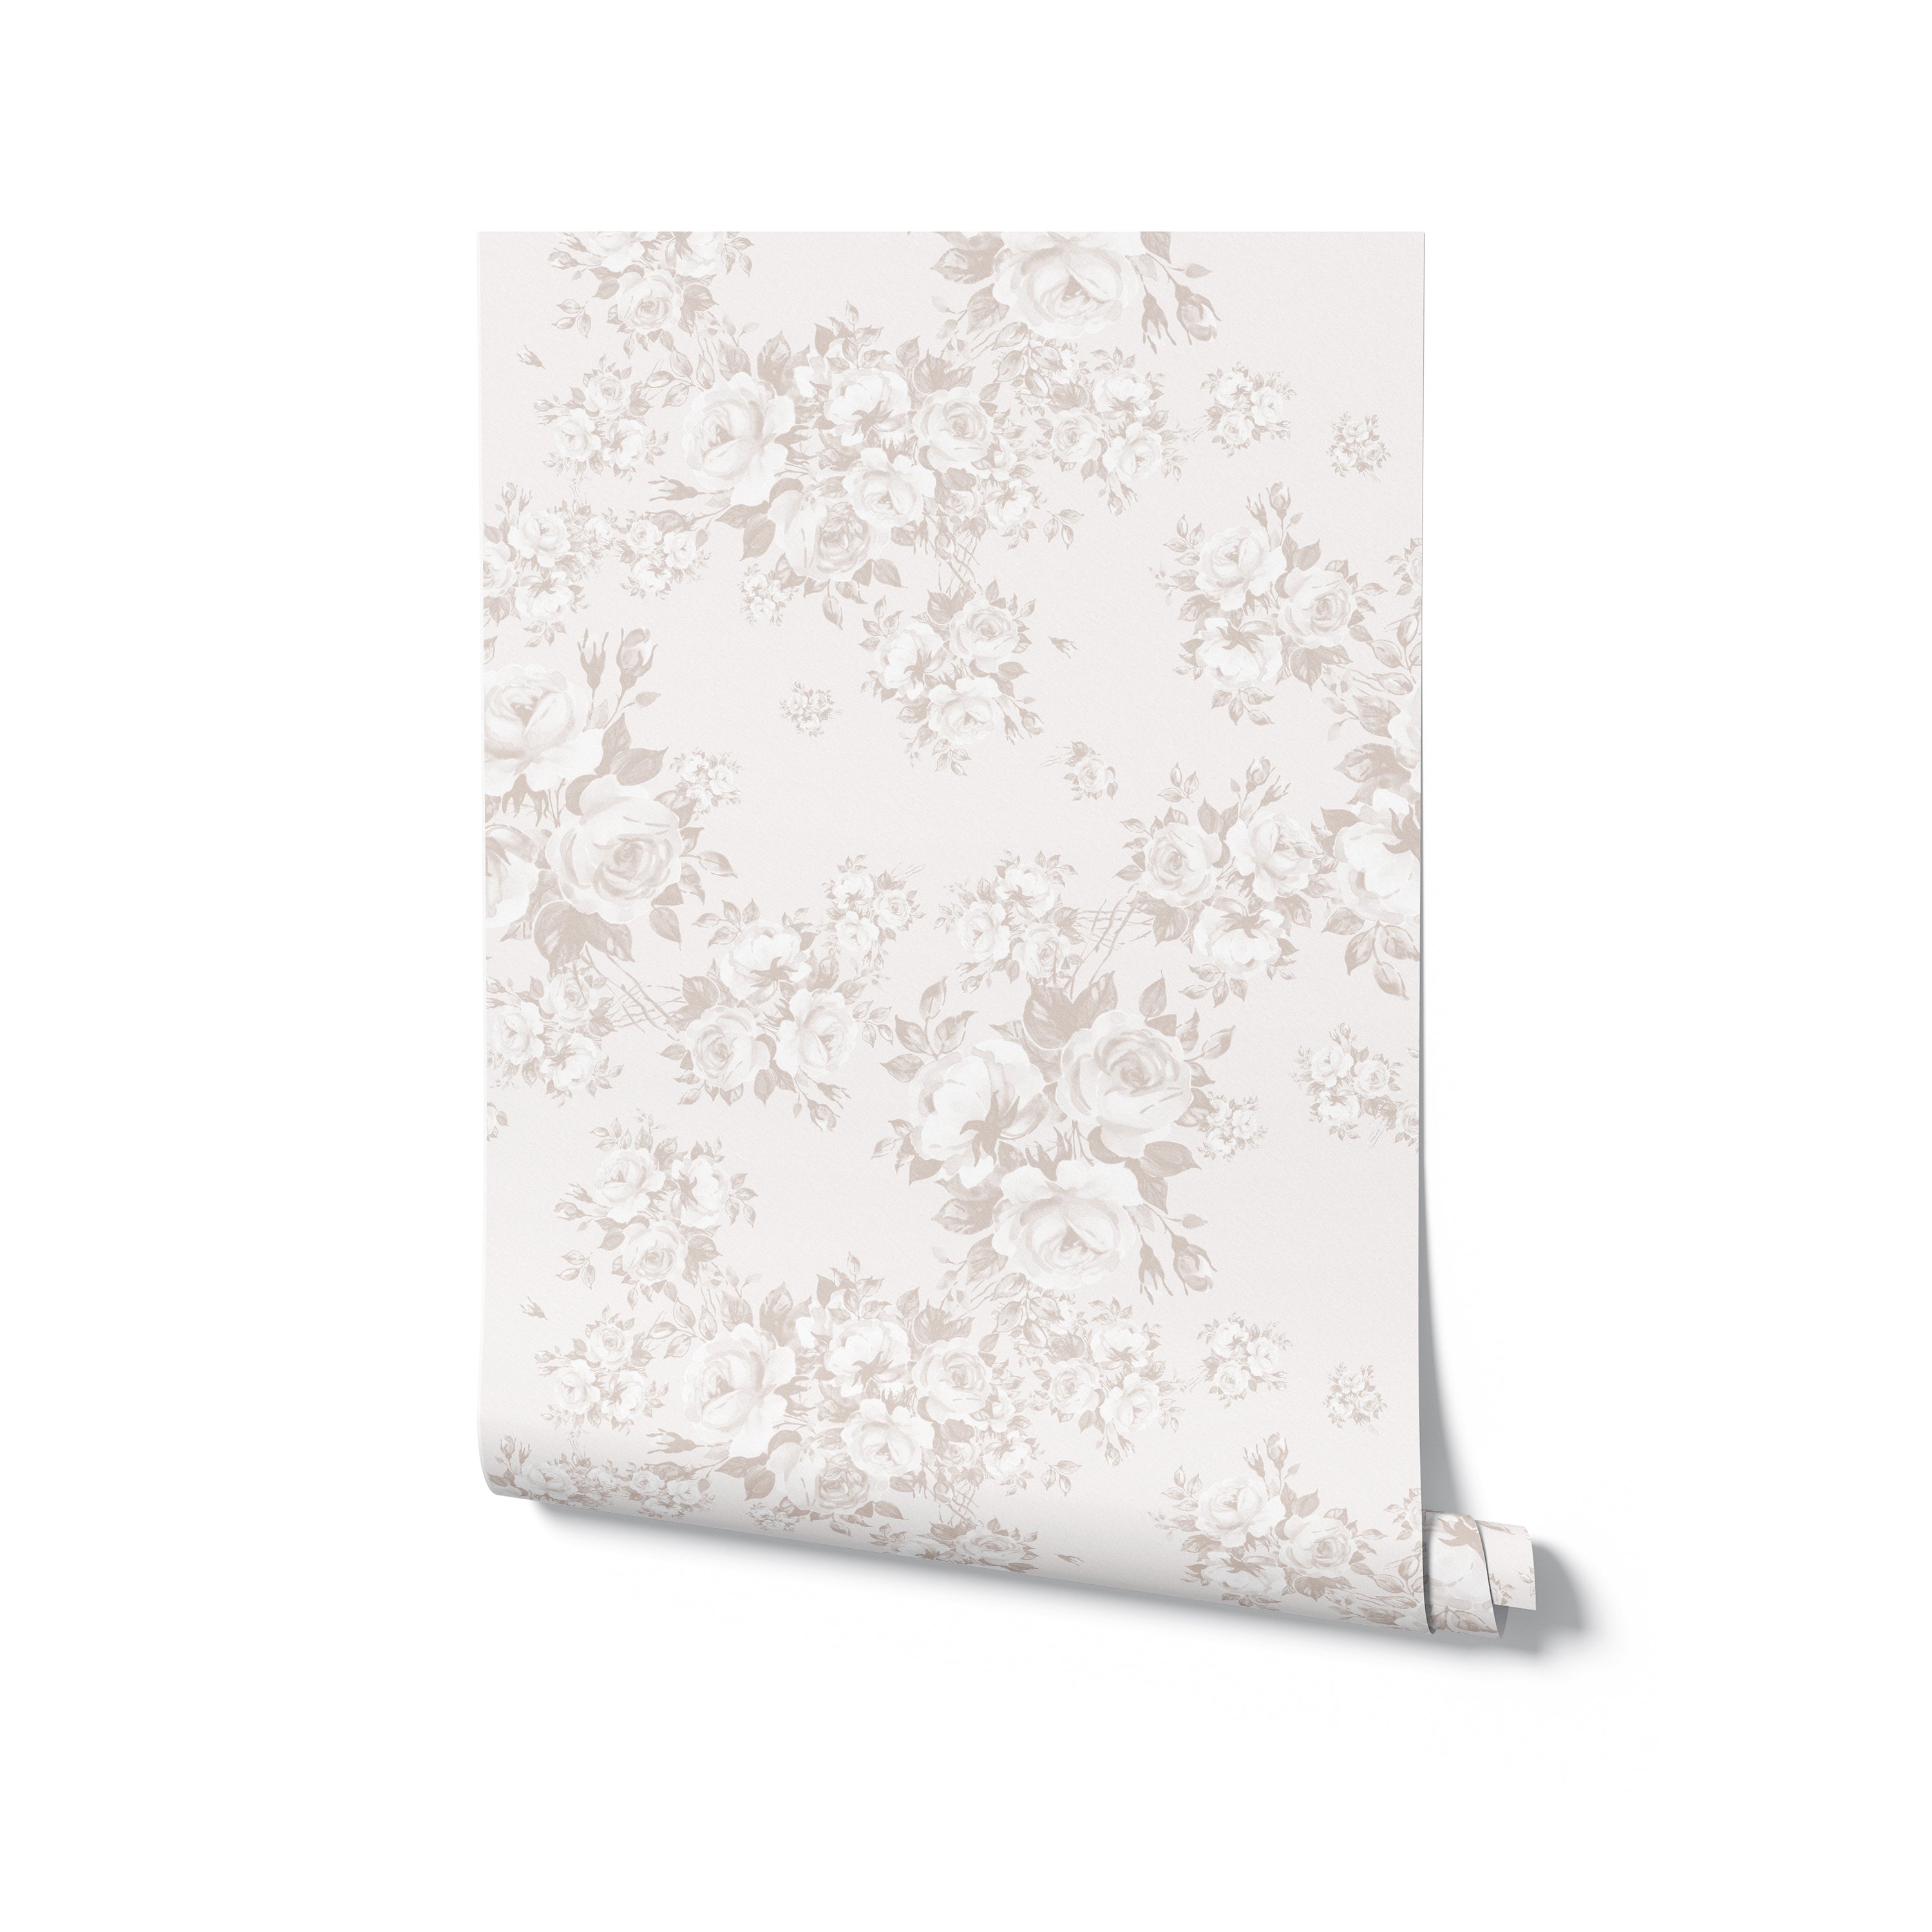 A single roll of 'Rose Bouquet Wallpaper' leaning against a white background. The wallpaper displays an elegant floral pattern with bouquets of roses in shades of grey on a soft, off-white linen texture.